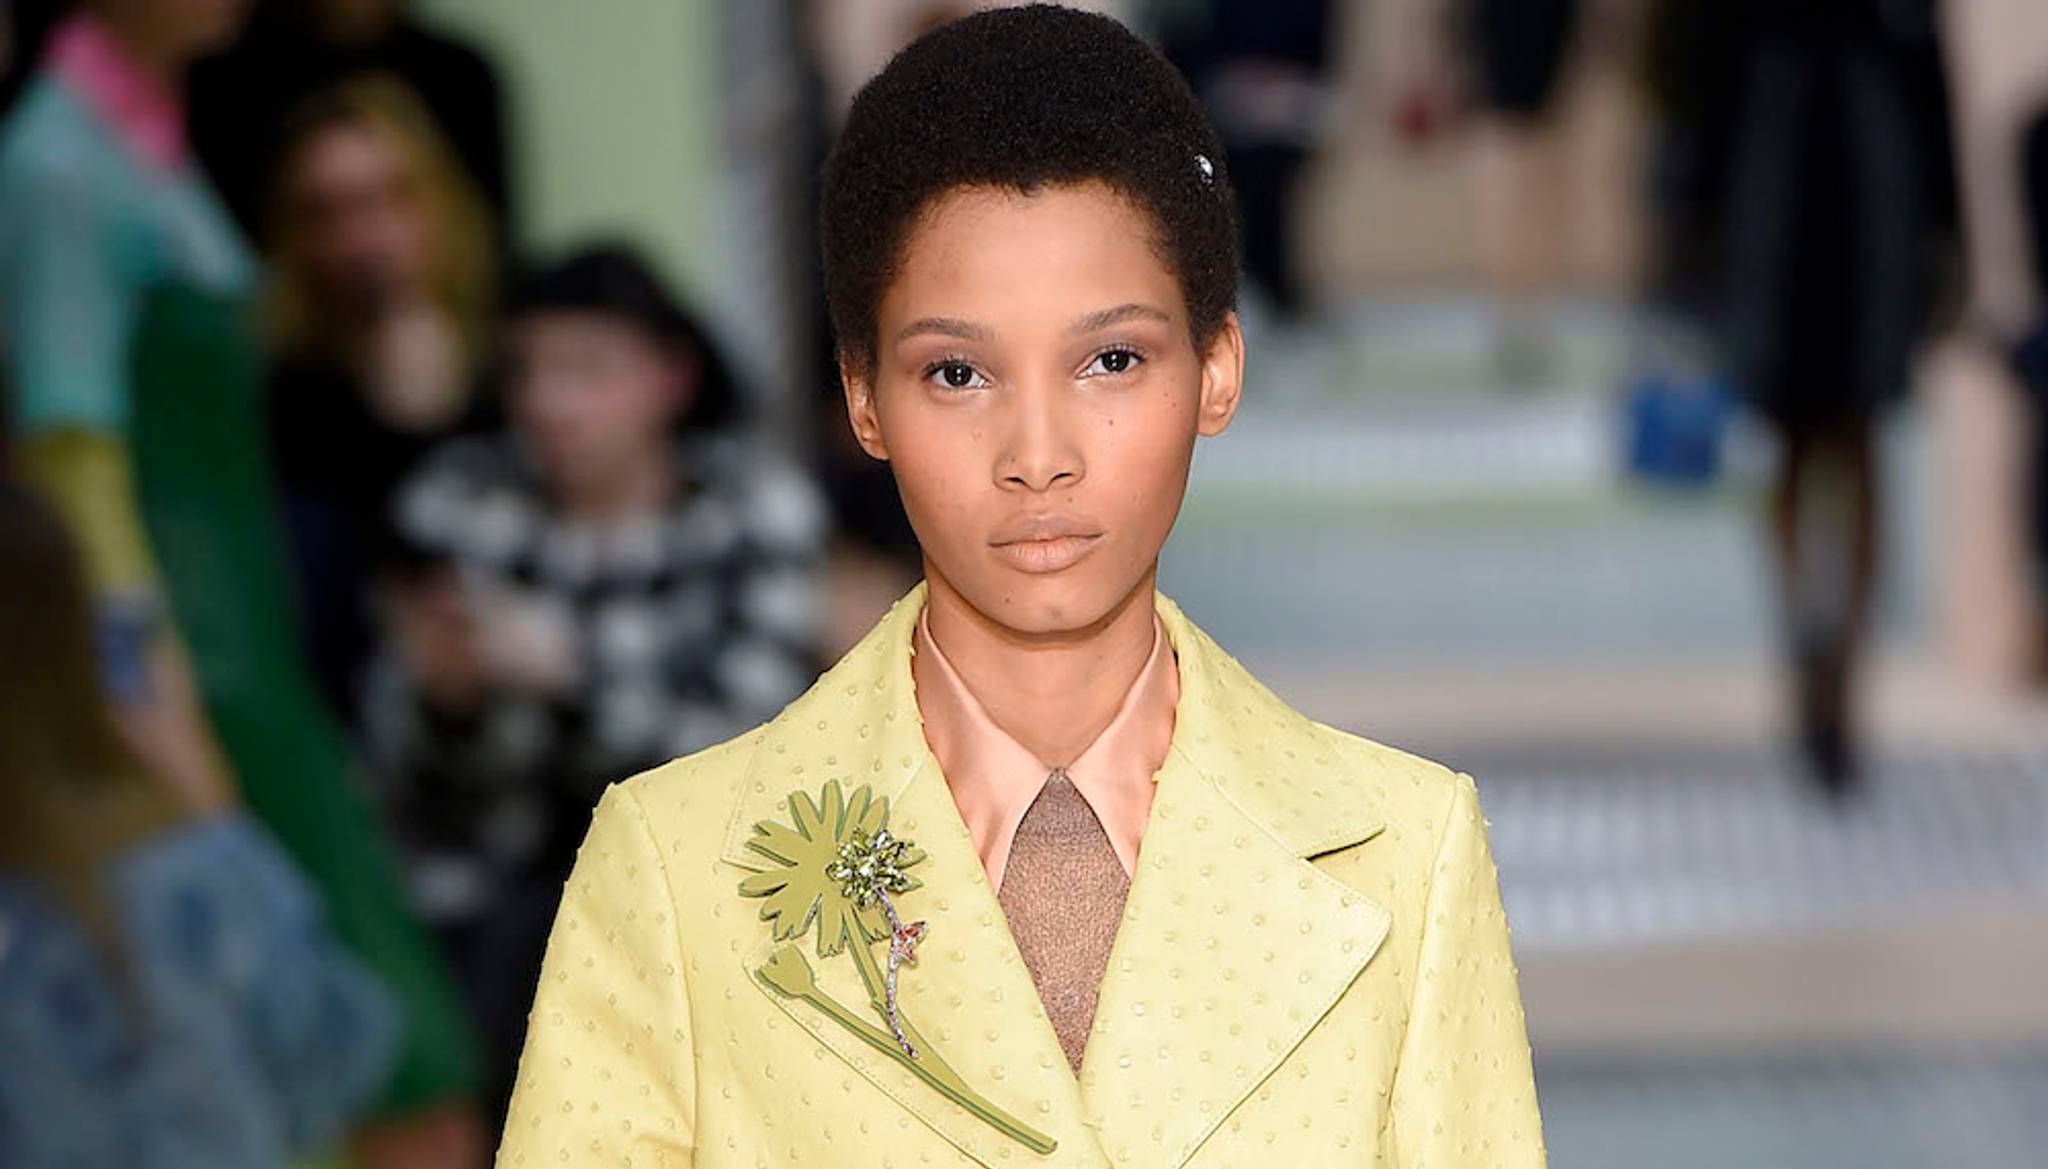 The afro takes centre stage at fashion week